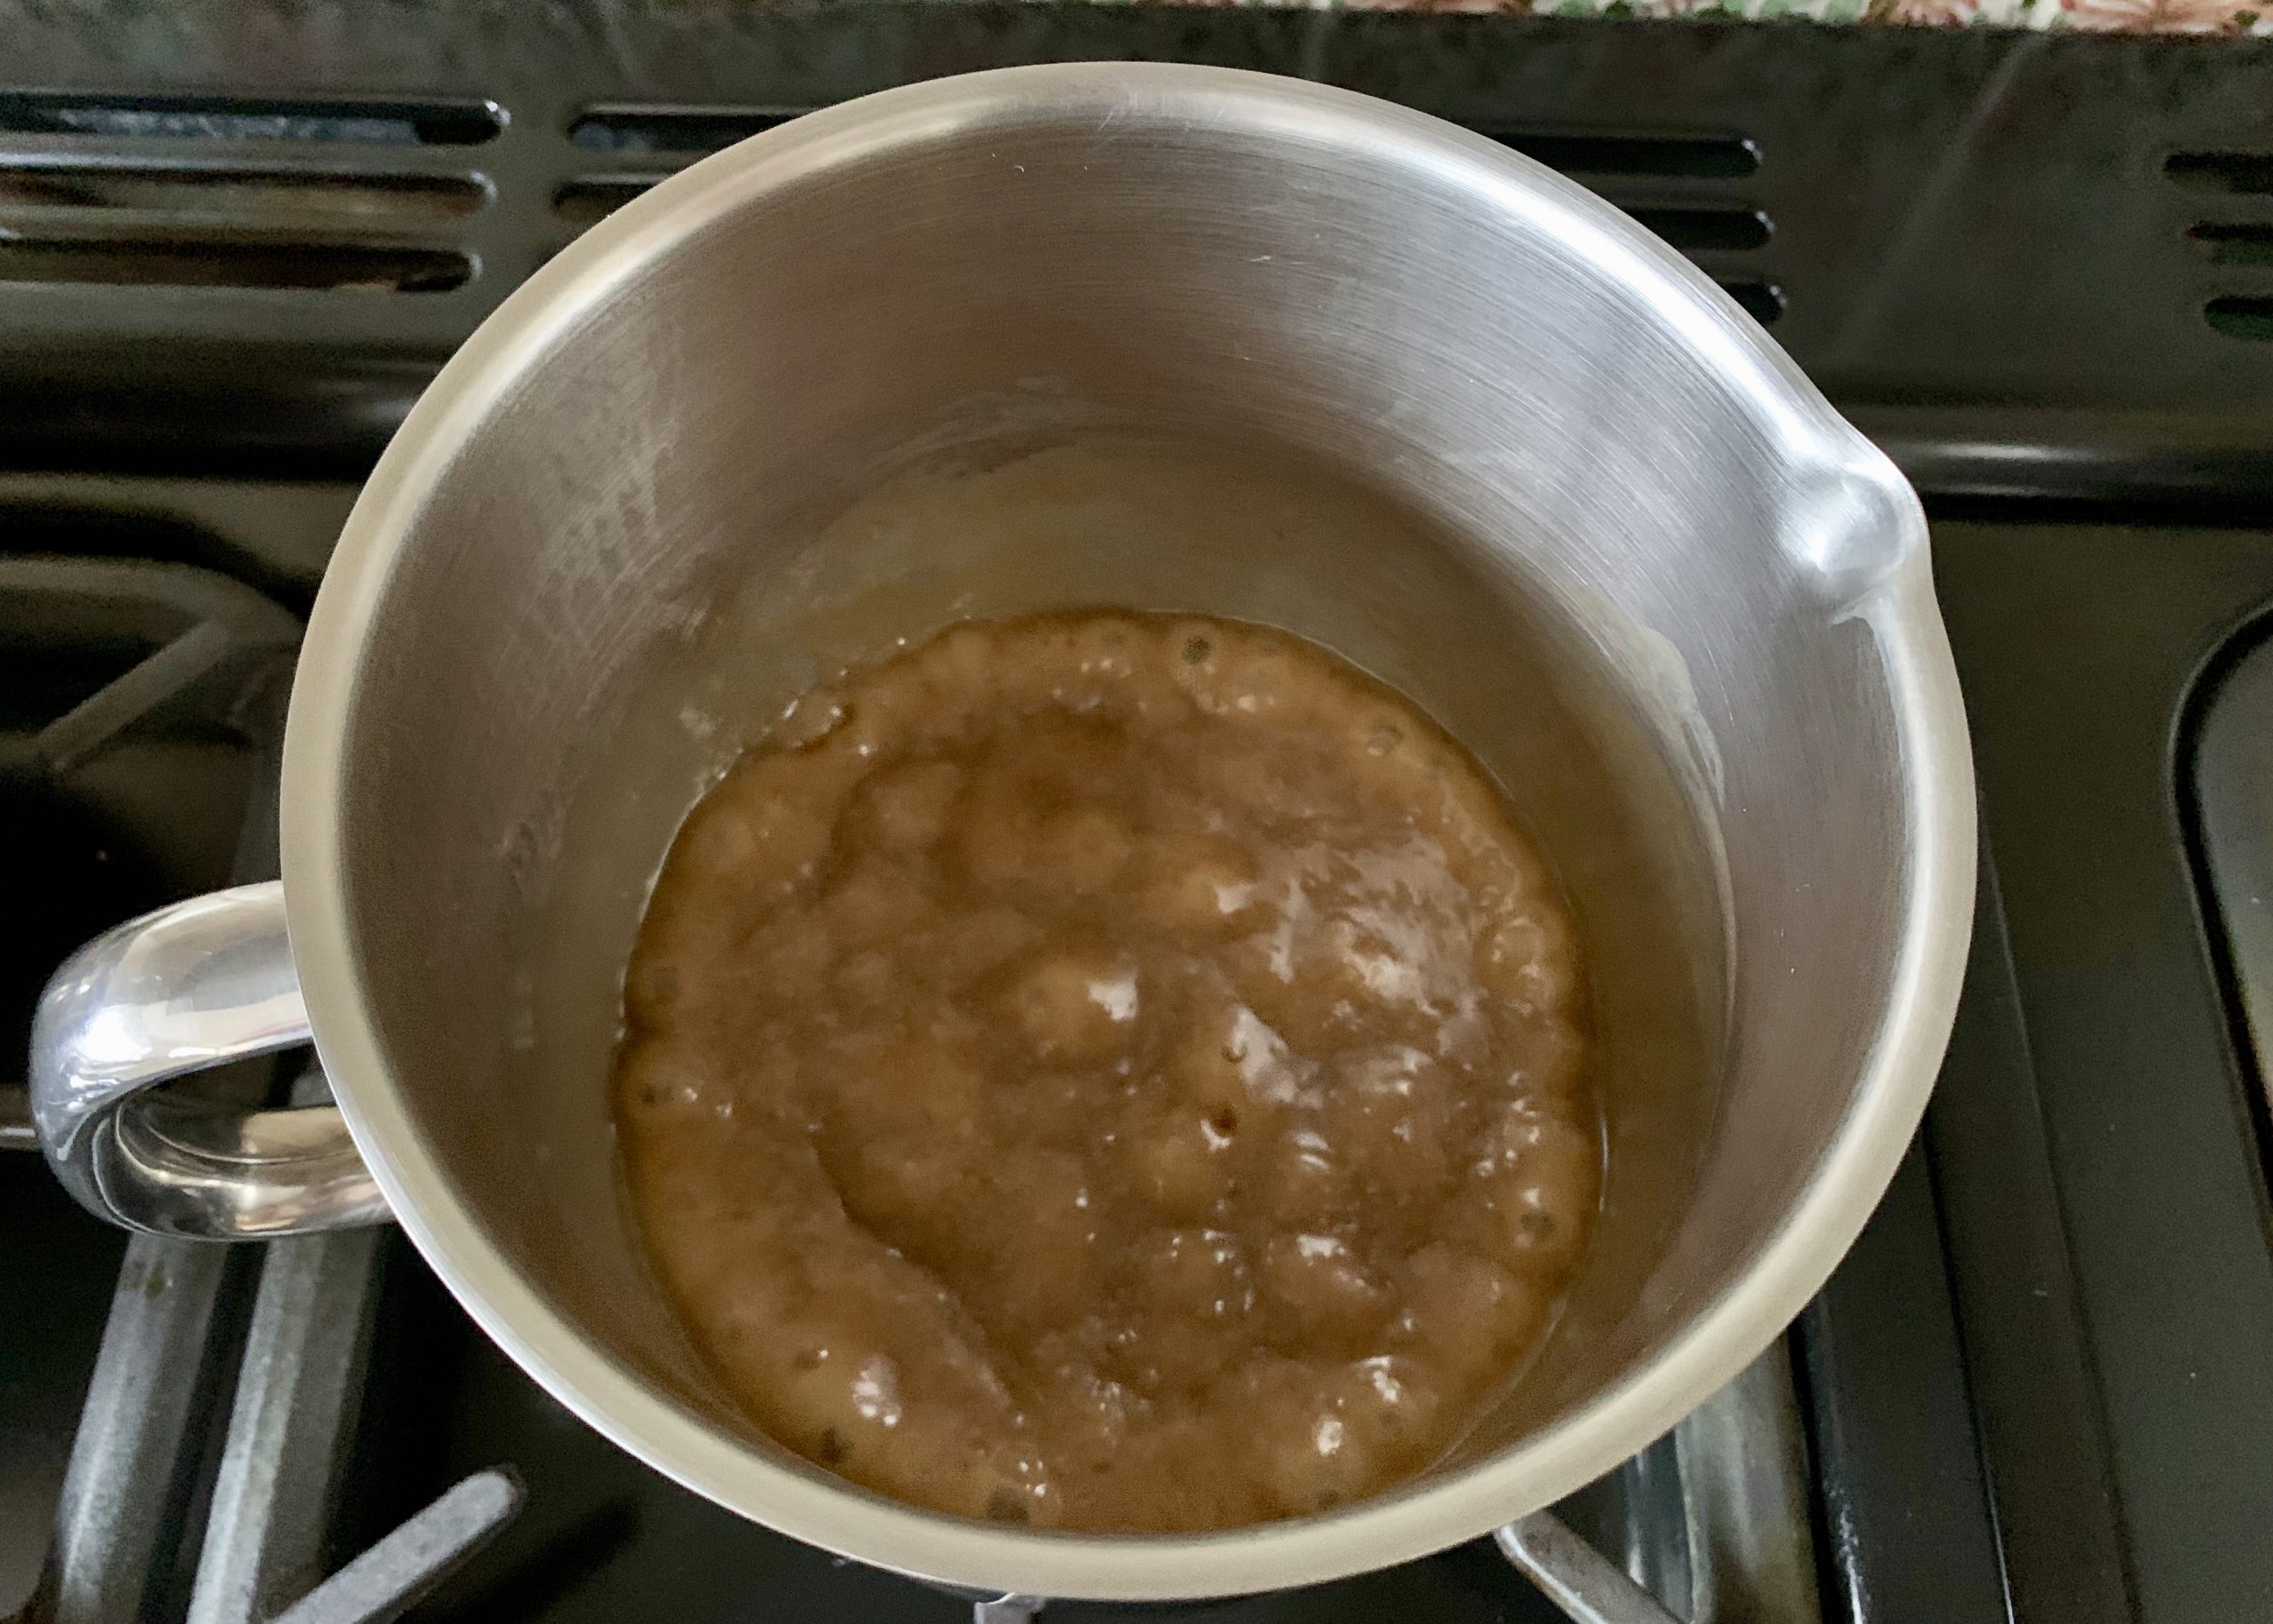 Sticky toffee sauce in a saucepan